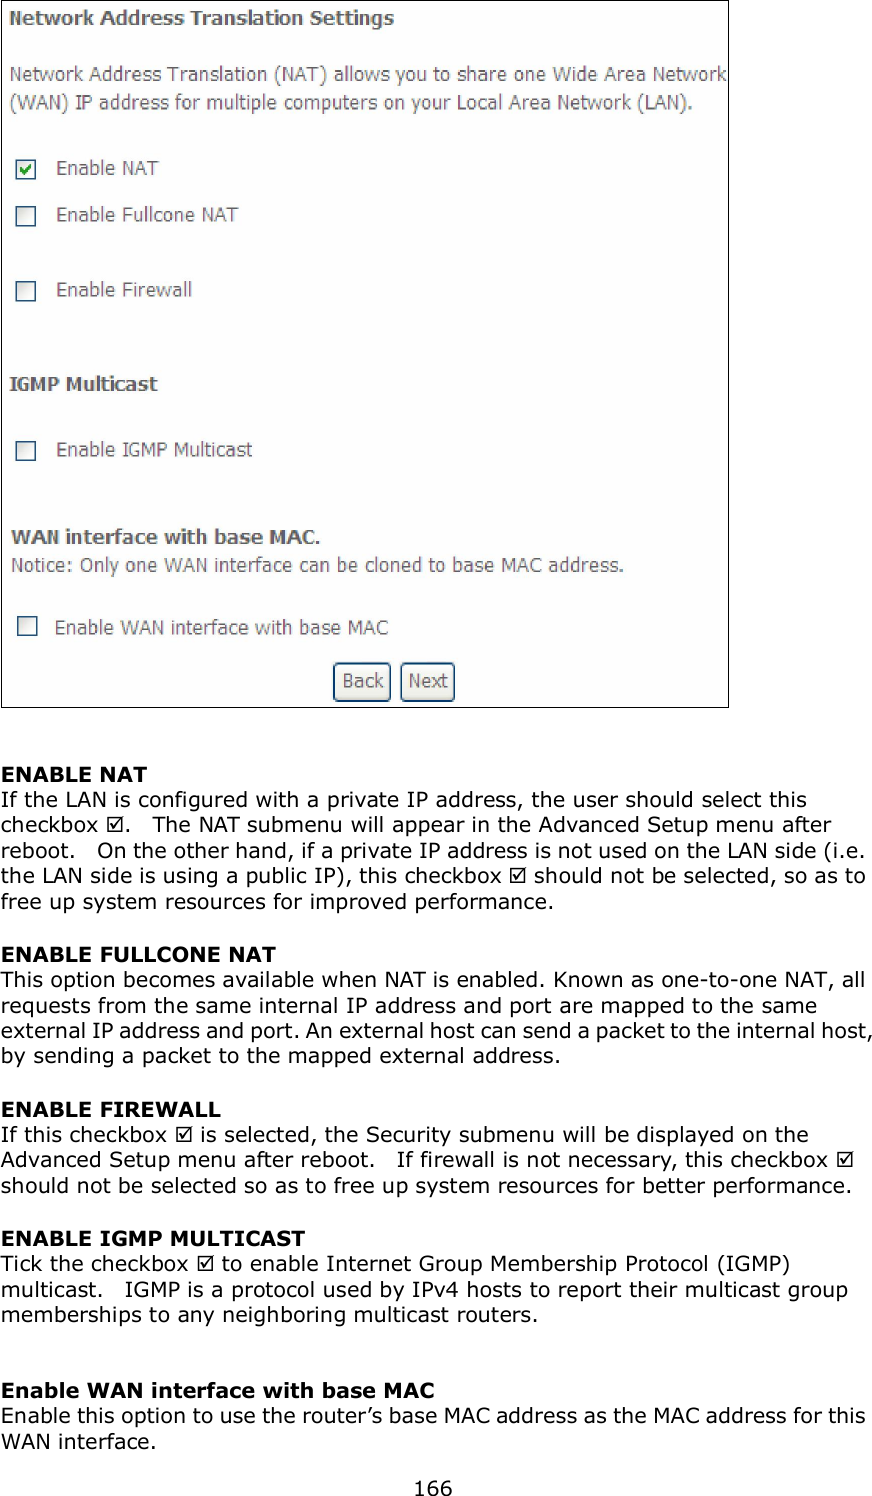  166   ENABLE NAT If the LAN is configured with a private IP address, the user should select this checkbox .    The NAT submenu will appear in the Advanced Setup menu after reboot.    On the other hand, if a private IP address is not used on the LAN side (i.e. the LAN side is using a public IP), this checkbox  should not be selected, so as to free up system resources for improved performance. ENABLE FULLCONE NAT     This option becomes available when NAT is enabled. Known as one-to-one NAT, all requests from the same internal IP address and port are mapped to the same external IP address and port. An external host can send a packet to the internal host, by sending a packet to the mapped external address. ENABLE FIREWALL If this checkbox  is selected, the Security submenu will be displayed on the Advanced Setup menu after reboot.    If firewall is not necessary, this checkbox  should not be selected so as to free up system resources for better performance.     ENABLE IGMP MULTICAST Tick the checkbox  to enable Internet Group Membership Protocol (IGMP) multicast.    IGMP is a protocol used by IPv4 hosts to report their multicast group memberships to any neighboring multicast routers.     Enable WAN interface with base MAC  Enable this option to use the router’s base MAC address as the MAC address for this WAN interface. 